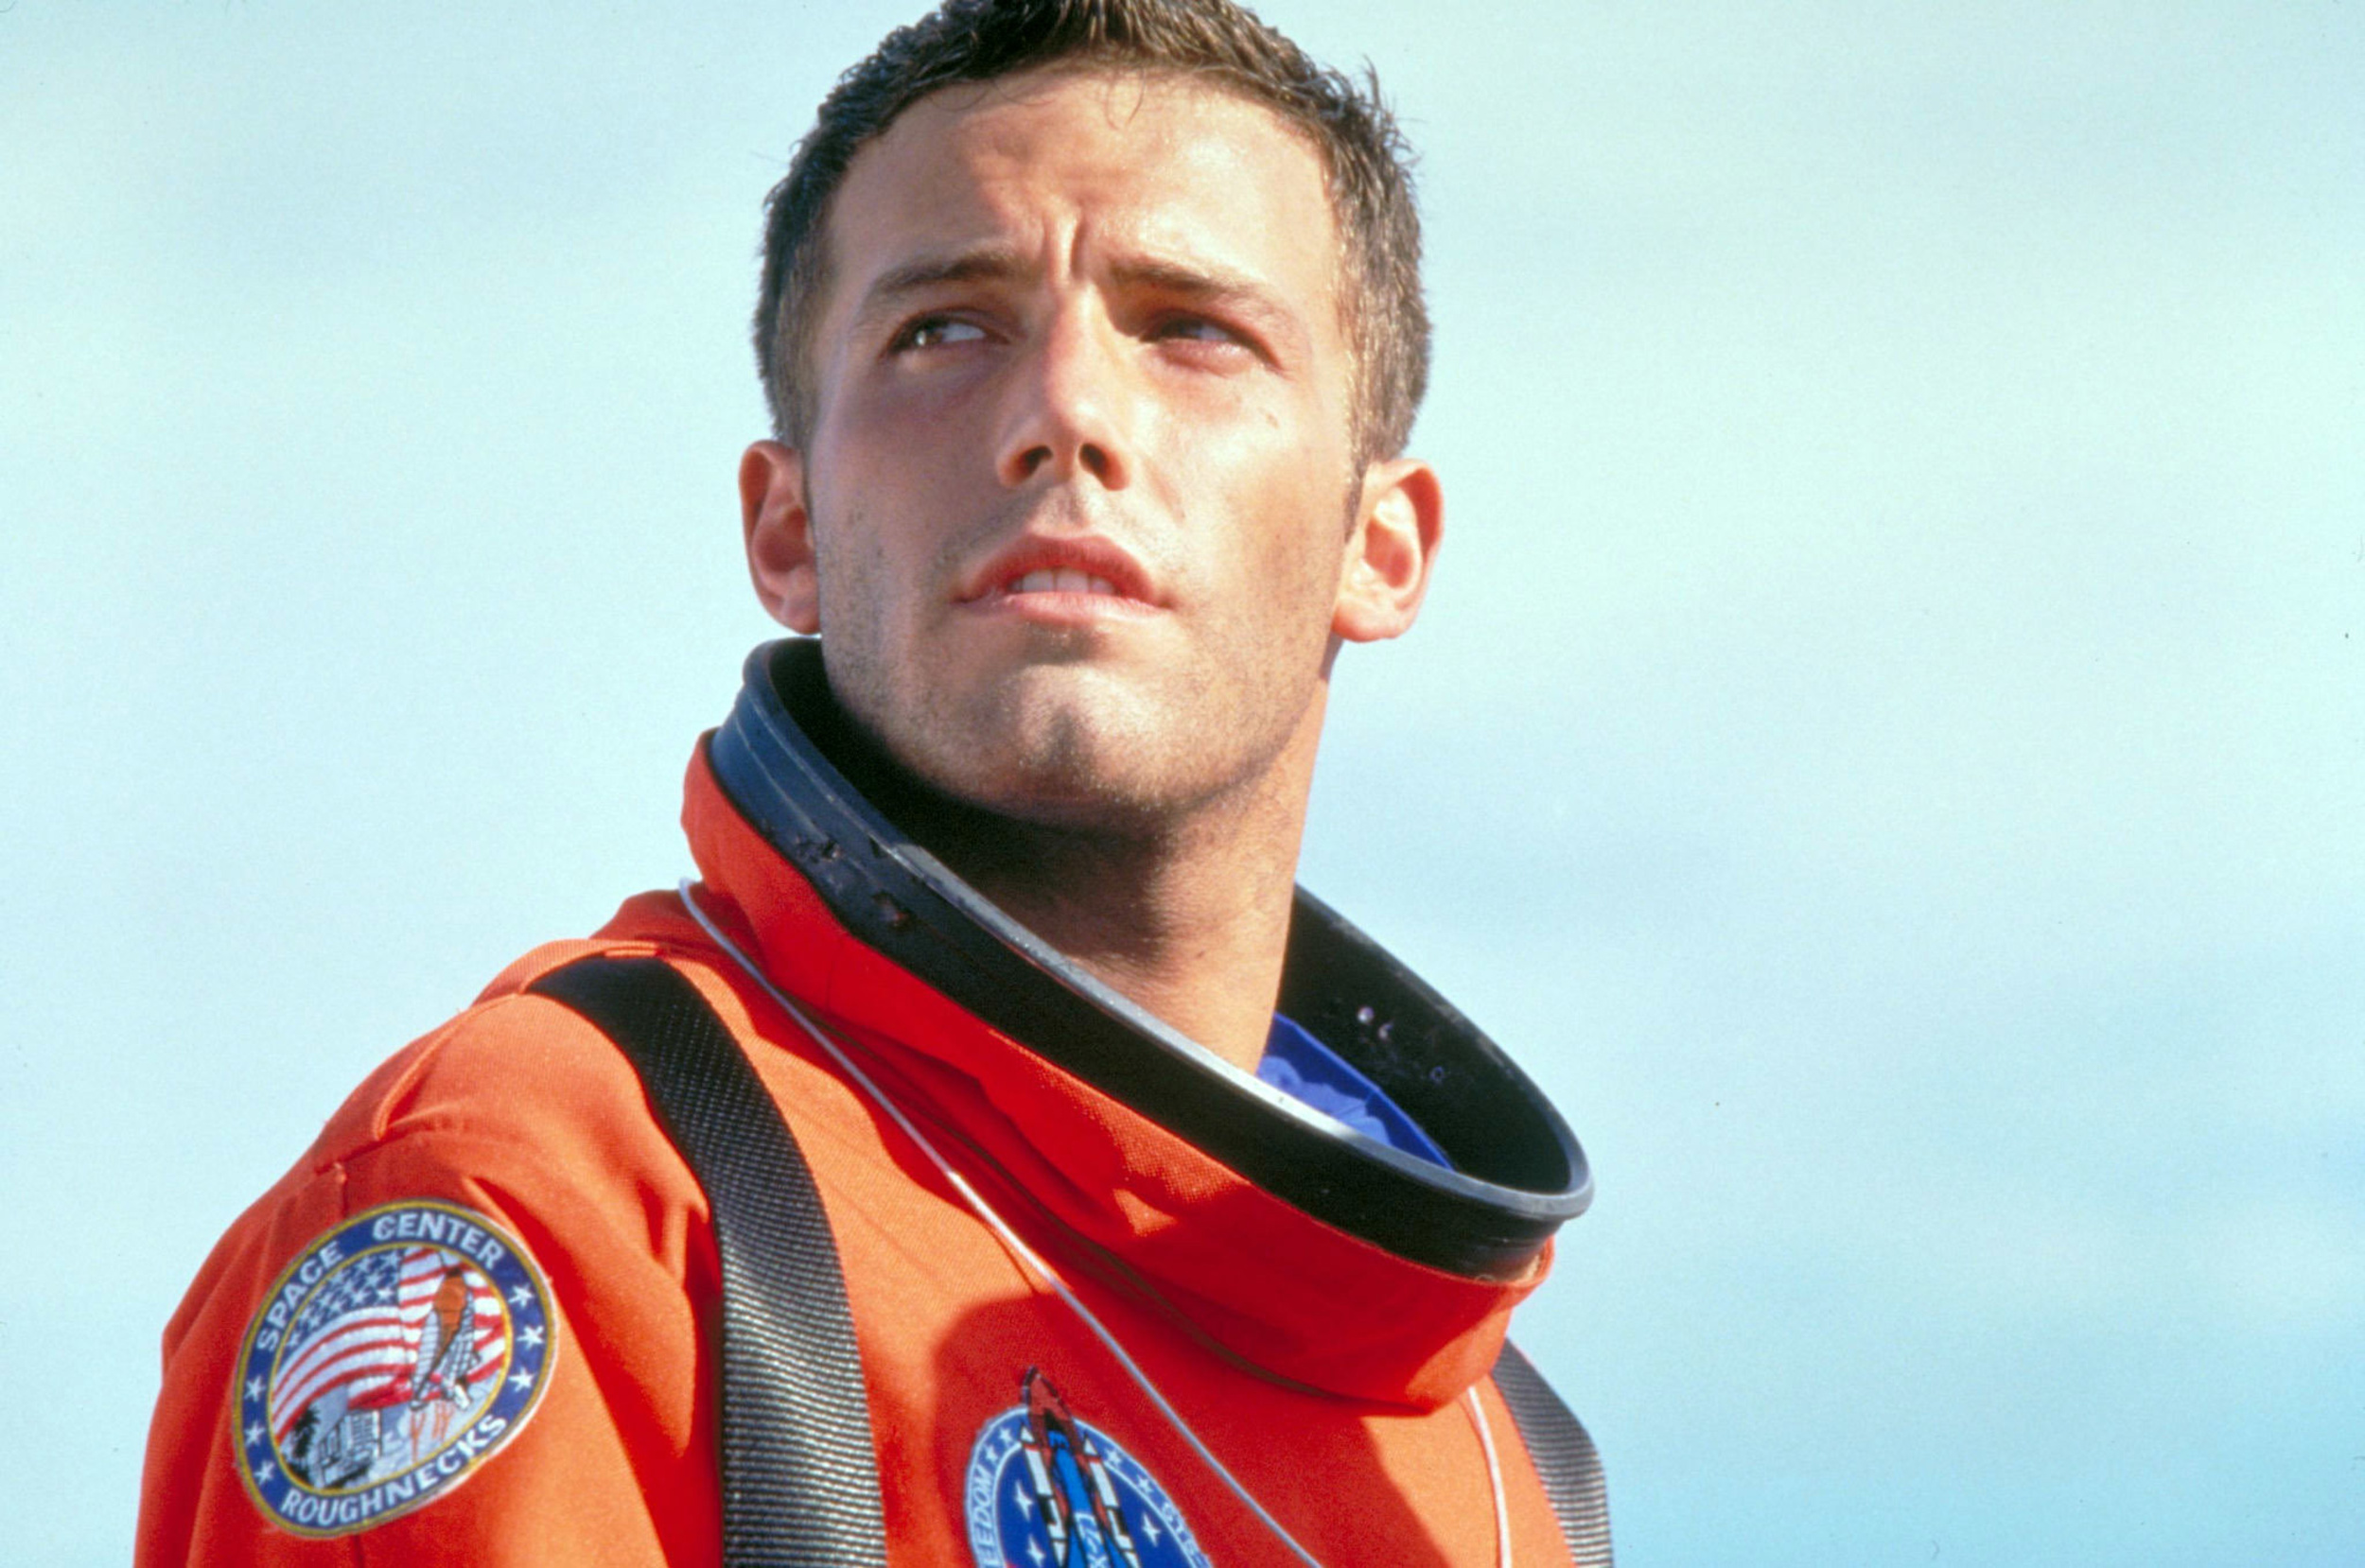 <p>In spite of its 38 percent rating on Rotten Tomatoes, <em>Armageddon</em> was included in the Criterion Collection’s list of DVD releases. Criterion is best noted for releasing arthouse films, critical darlings, and movies they consider “cinema at its finest.” Needless to say, <em>Armageddon</em> was an unexpected choice. For the essay paired with the release — a Criterion staple — the company chose film scholar Jeanine Basinger, who had taught Bay in college.</p><p>You may also like: <a href='https://www.yardbarker.com/entertainment/articles/the_20_best_duets_in_country_music_history_031324/s1__35276156'>The 20 best duets in country music history</a></p>